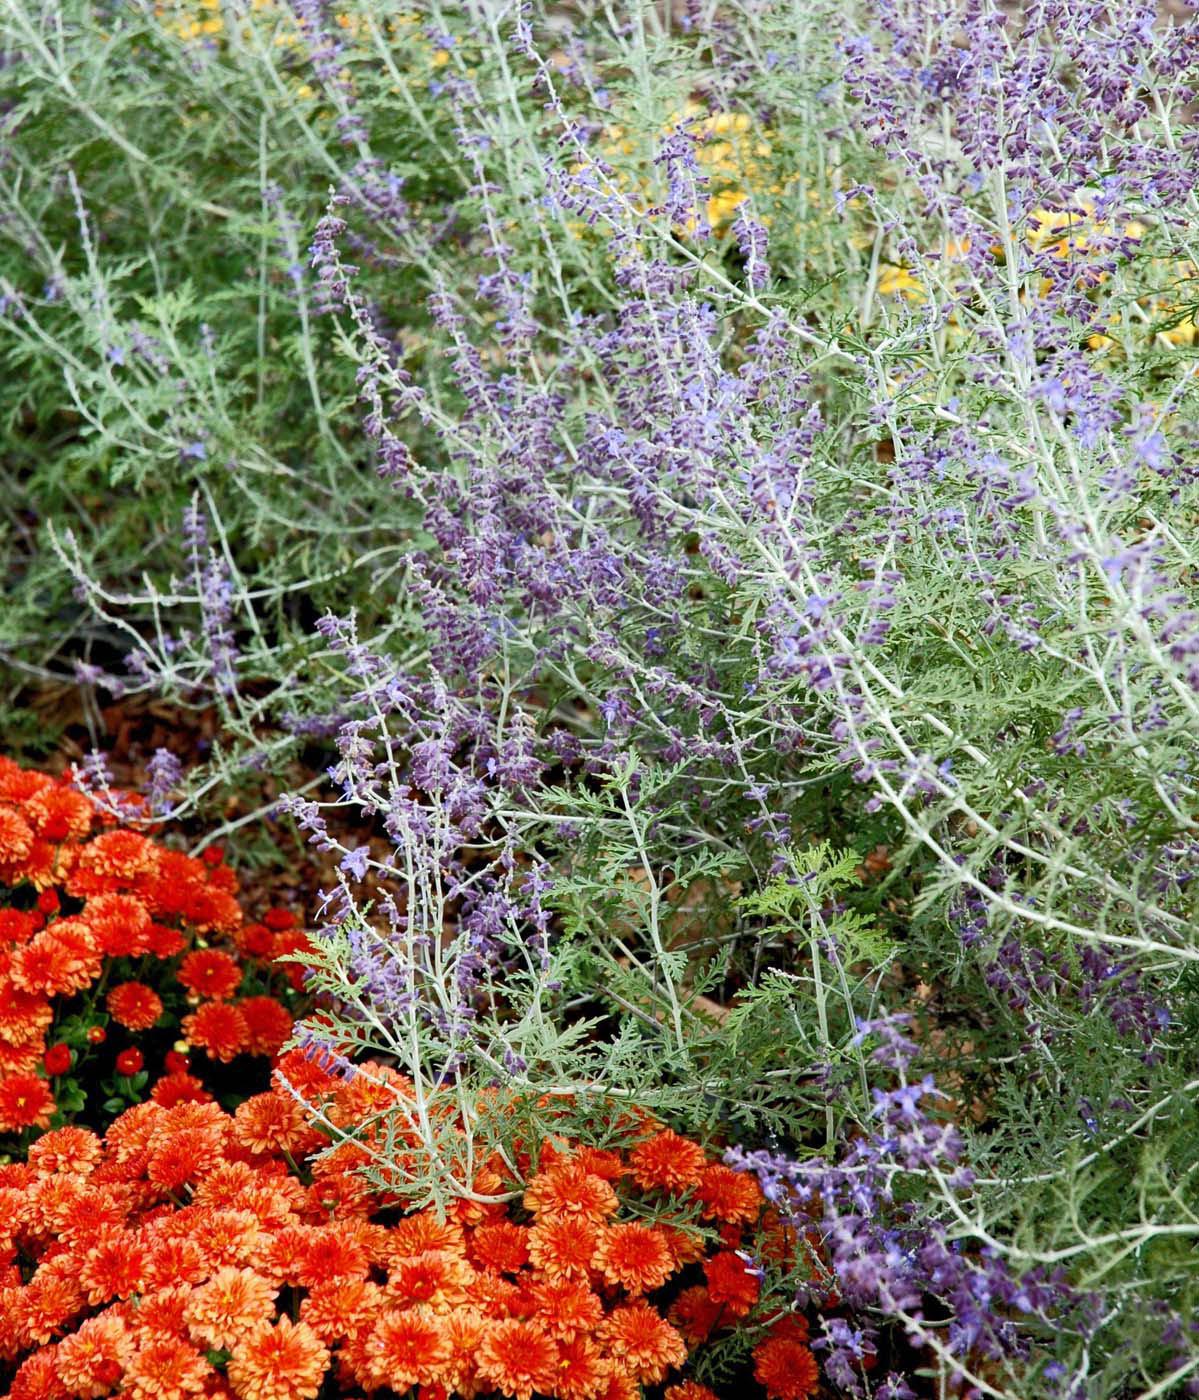 This Padre Orange Belgian mum perfectly complements the blue-flowered Russian sage. (Photos by Norman Winter)